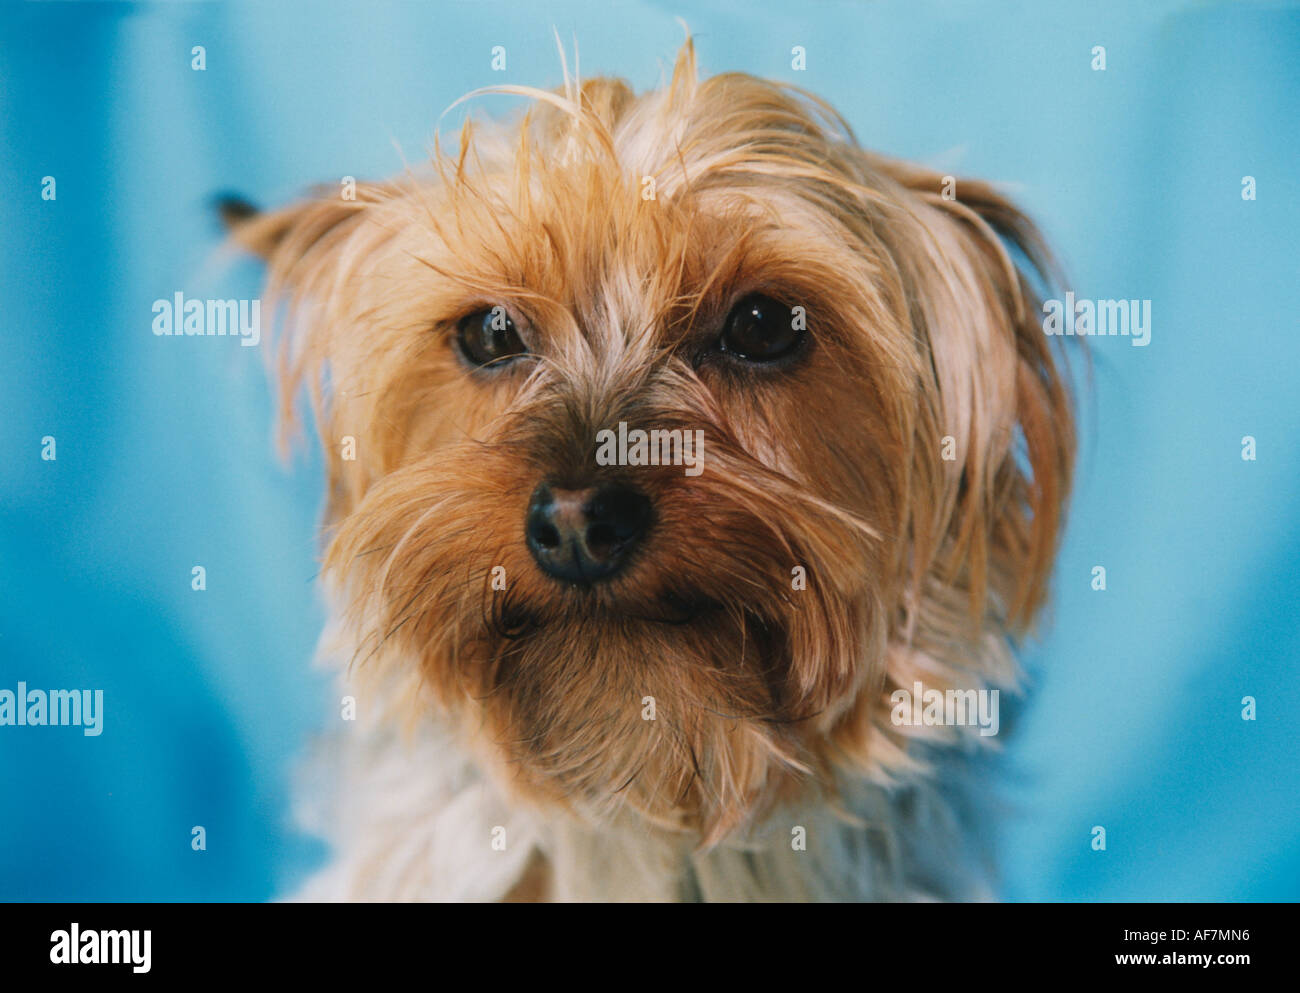 sweet looking yorkshire terrier portrait picture Stock Photo